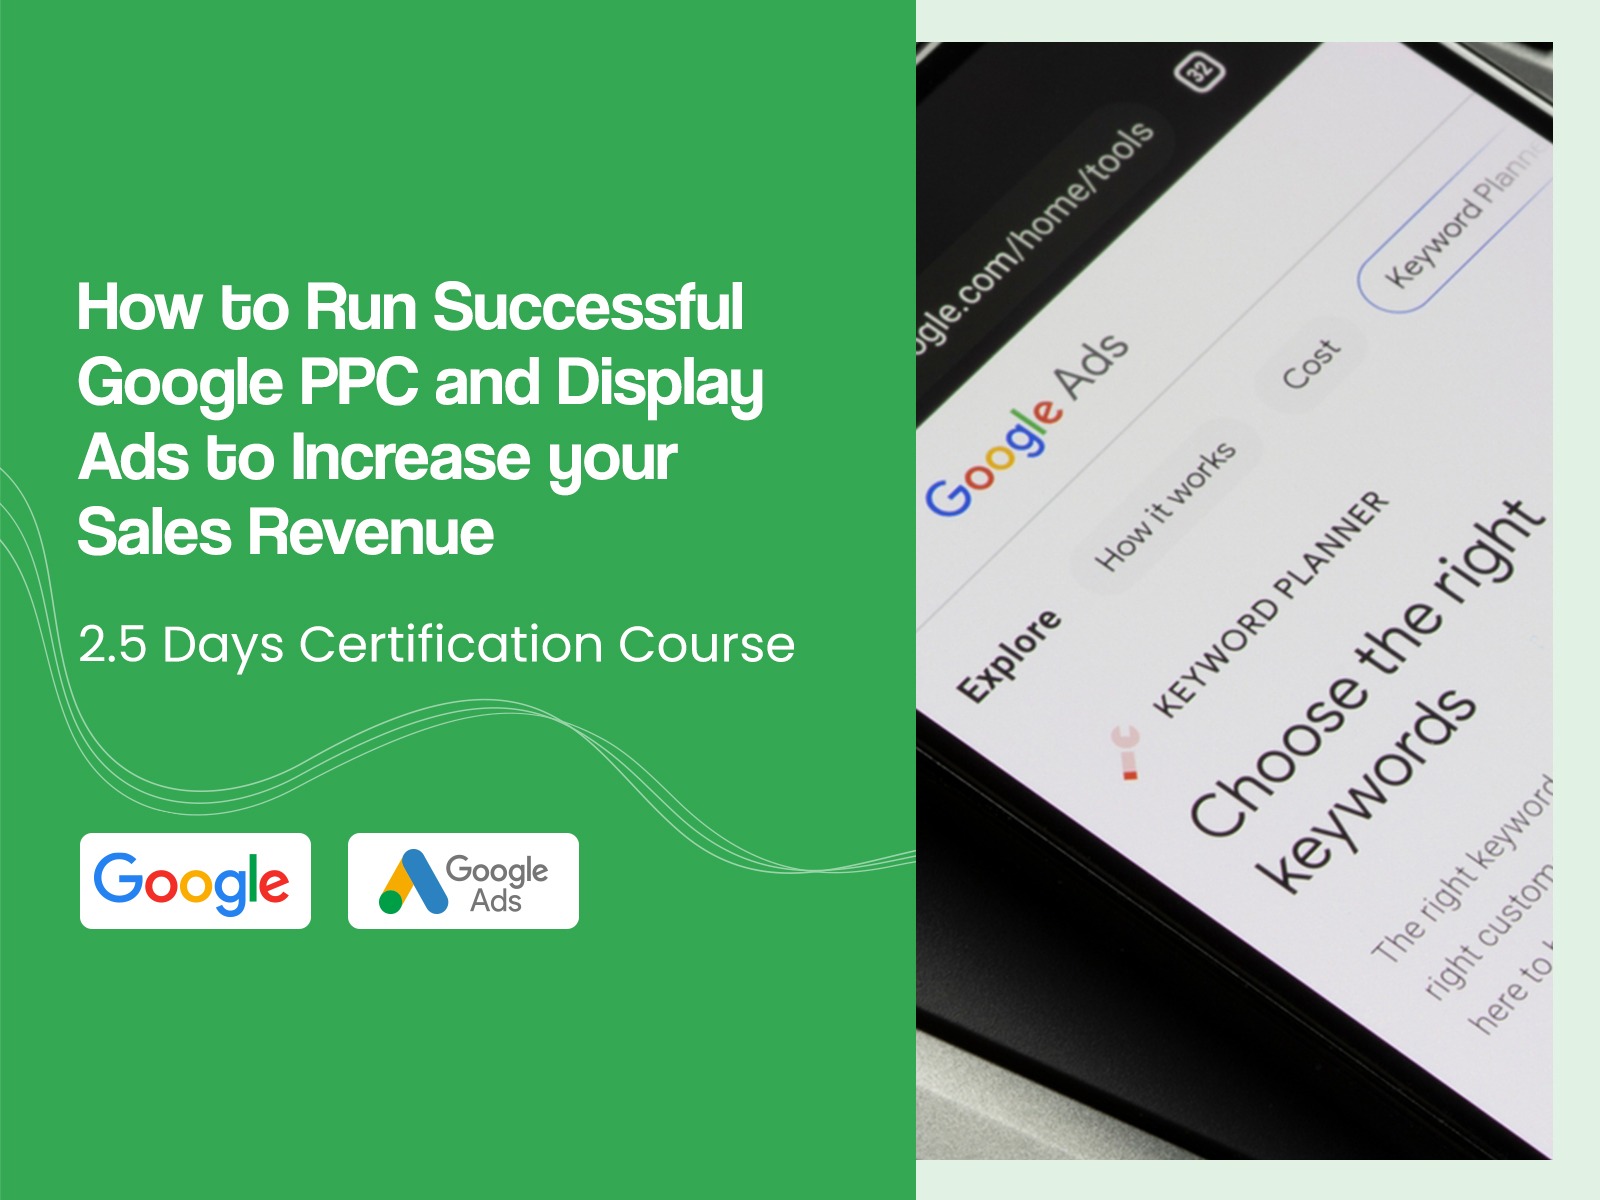 How to Run Successful Google PPC and Display Ads to Increase your Sales Revenue